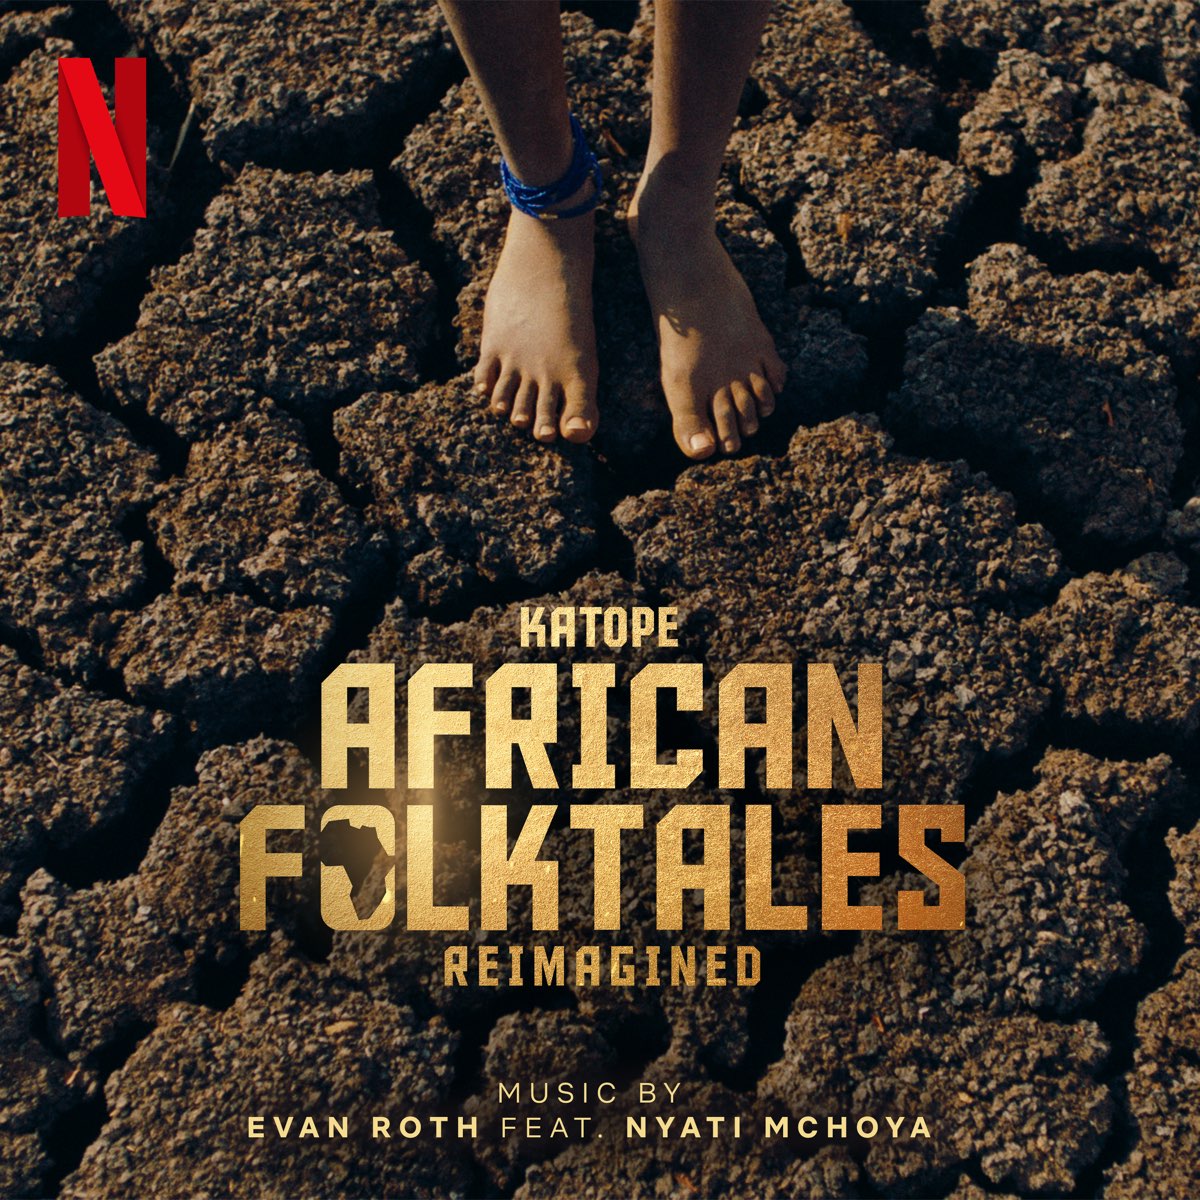 ‎katope Soundtrack From The Netflix Series African Folktales Reimagined By Evan Roth On Apple 6486